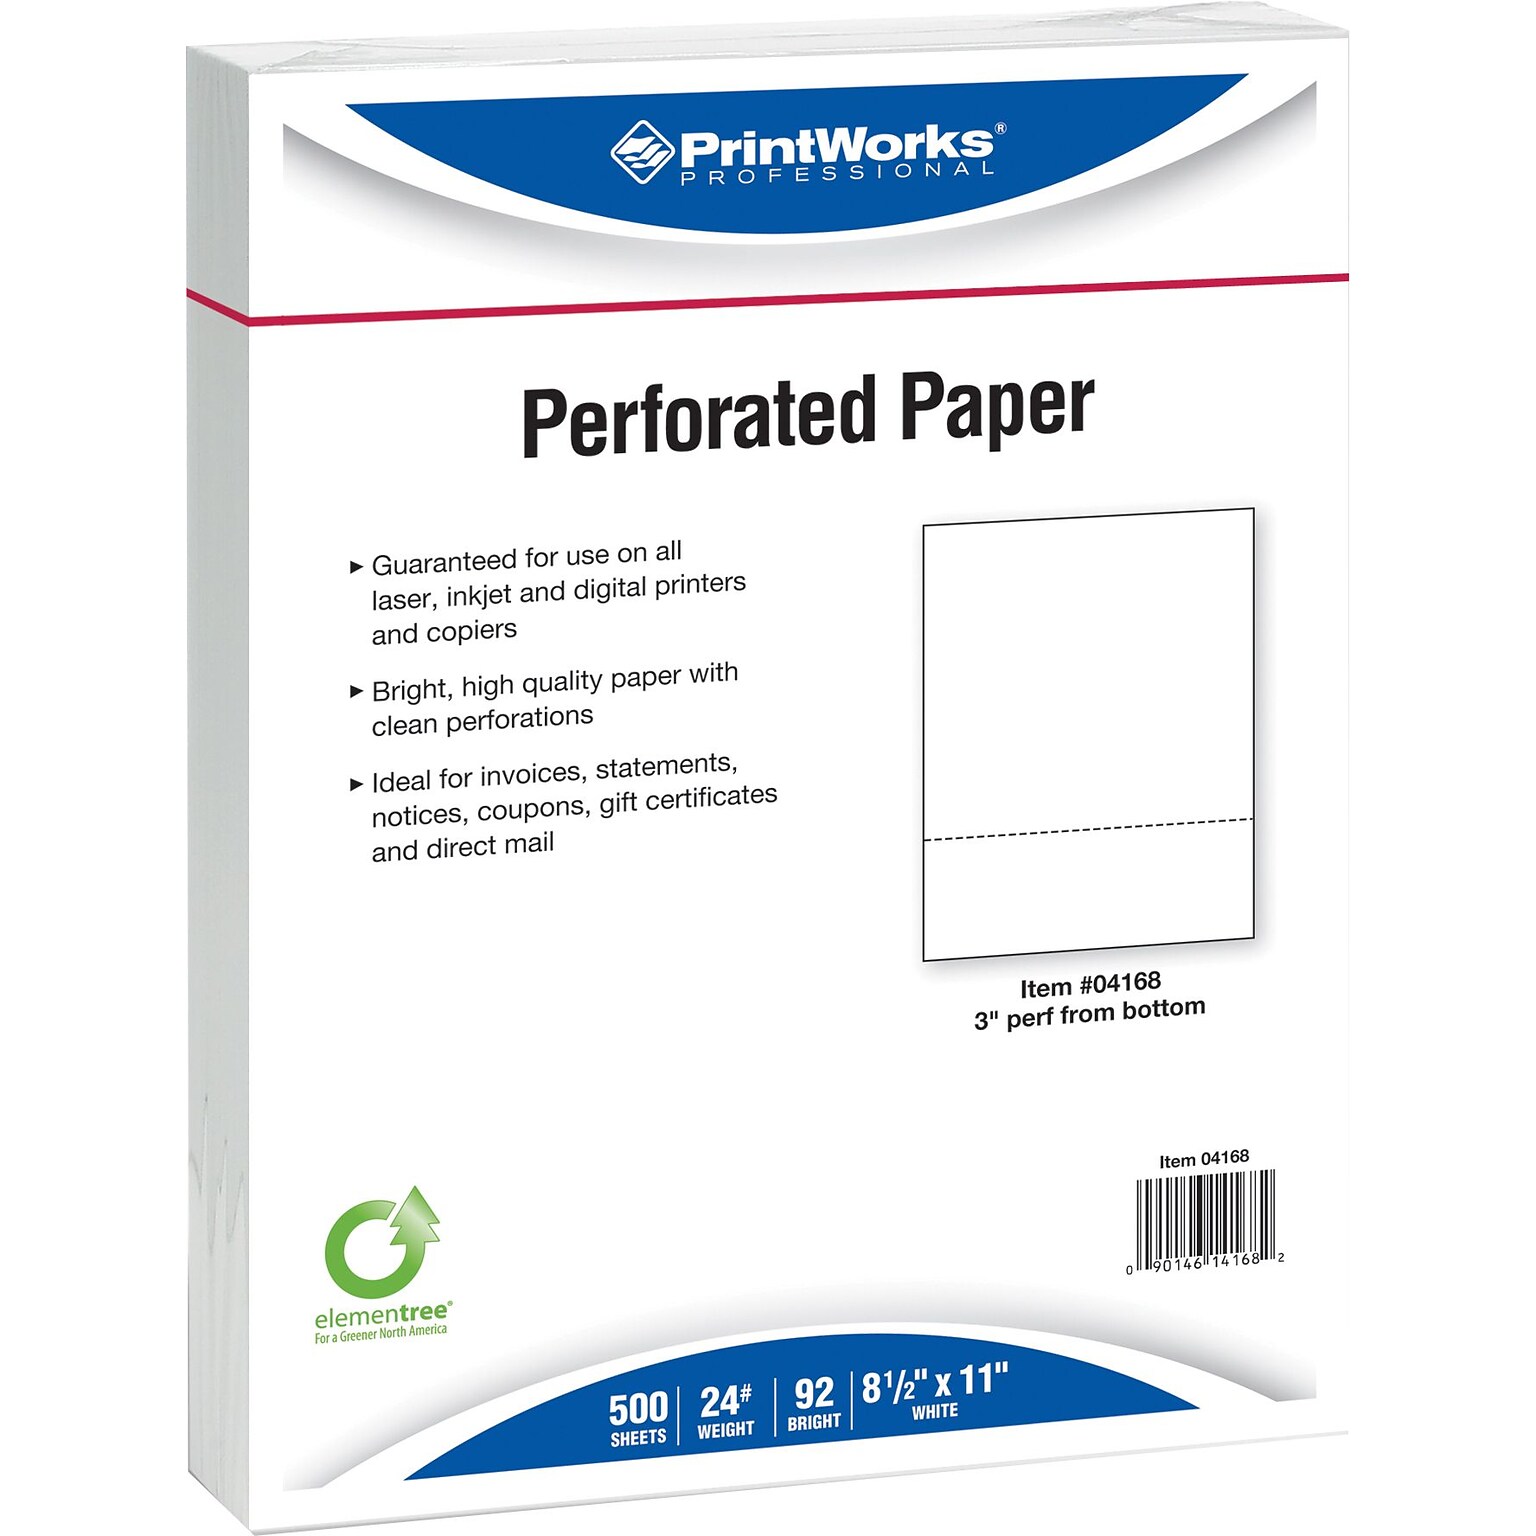 Printworks® Professional 8.5 x 11 Perforated Paper, 24 lbs., 92 Brightness, 2500 Sheets/Carton (04168)